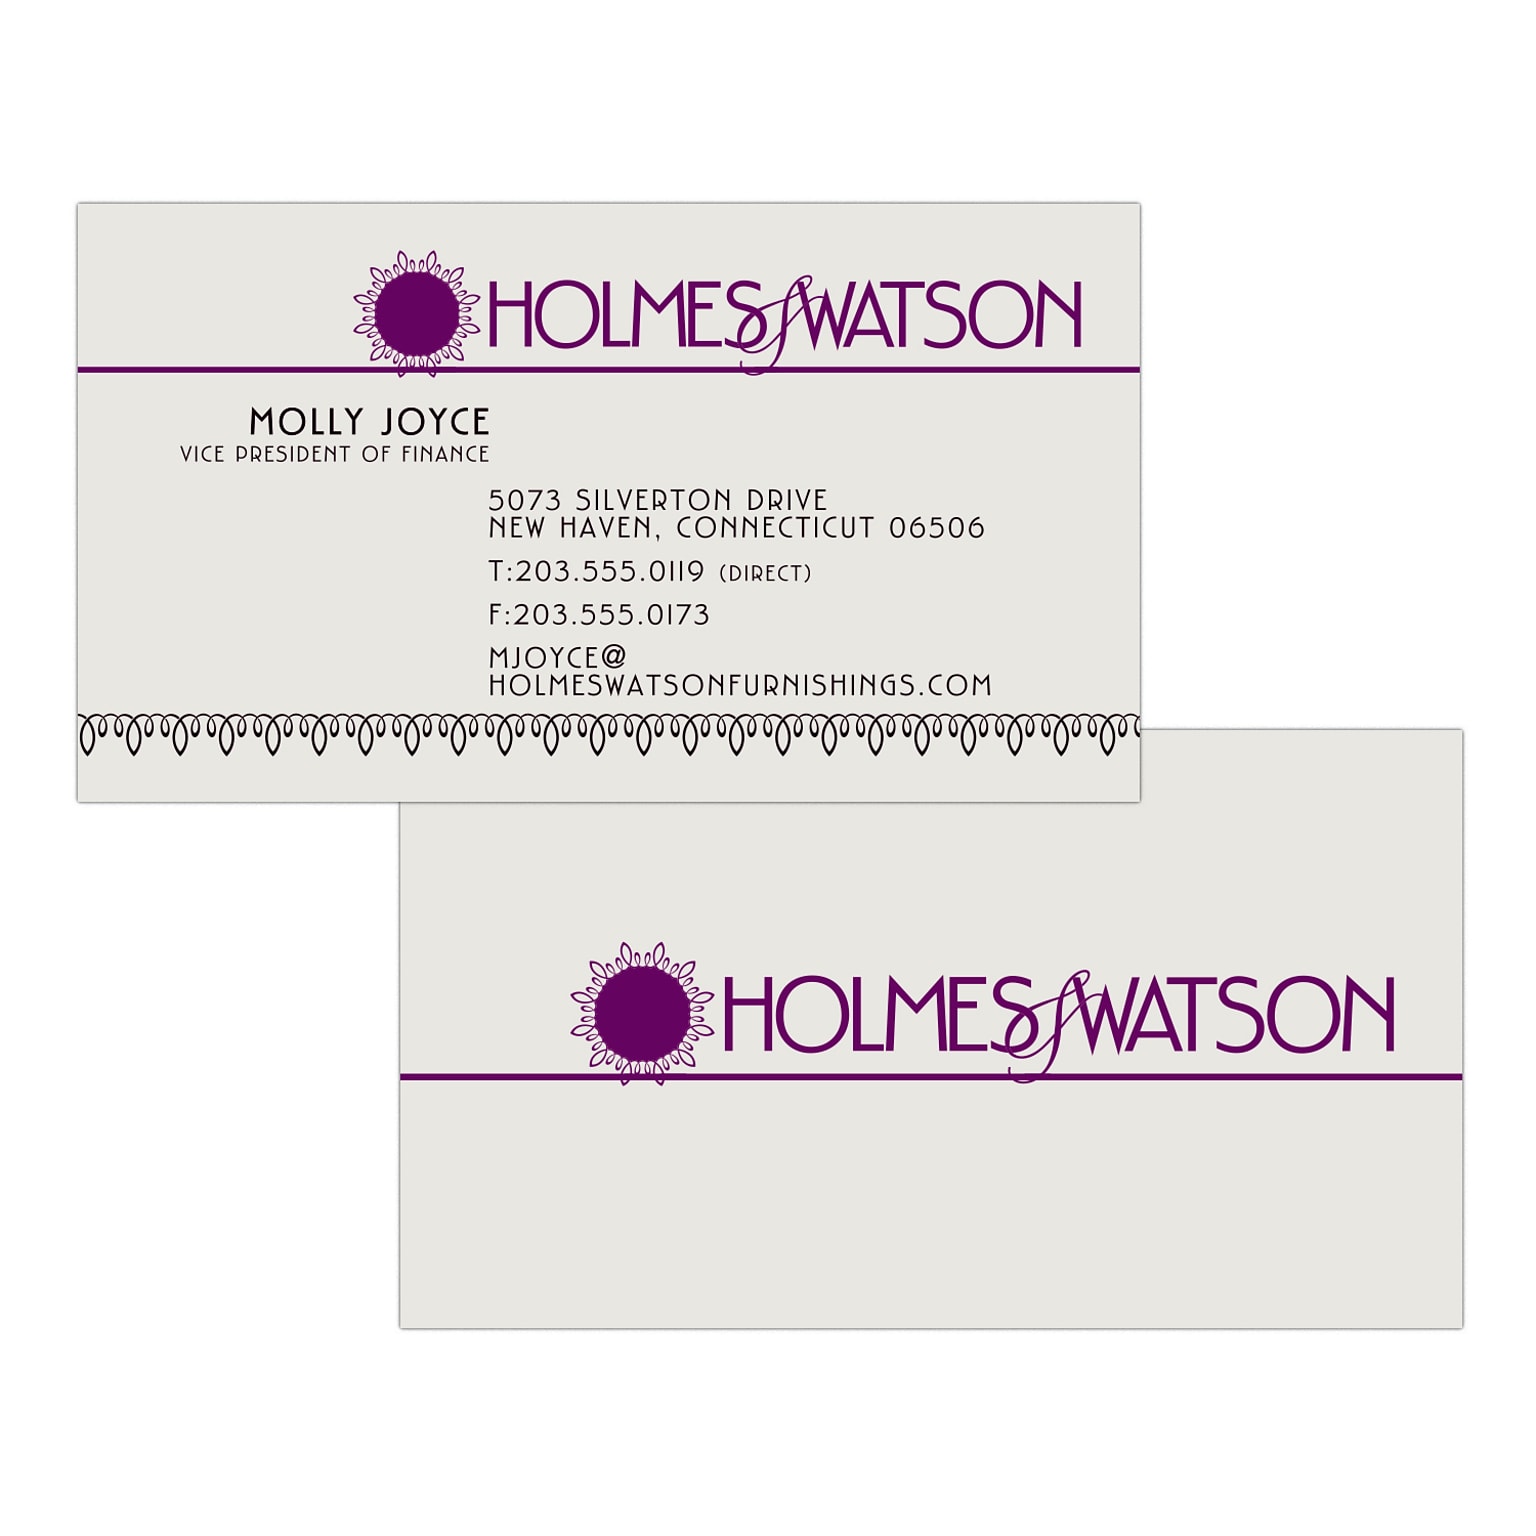 Custom 1-2 Color Business Cards, CLASSIC CREST® Smooth Antique Gray 80#, Flat Print, 1 Standard & 1 Custom Inks, 2-Sided, 250/PK